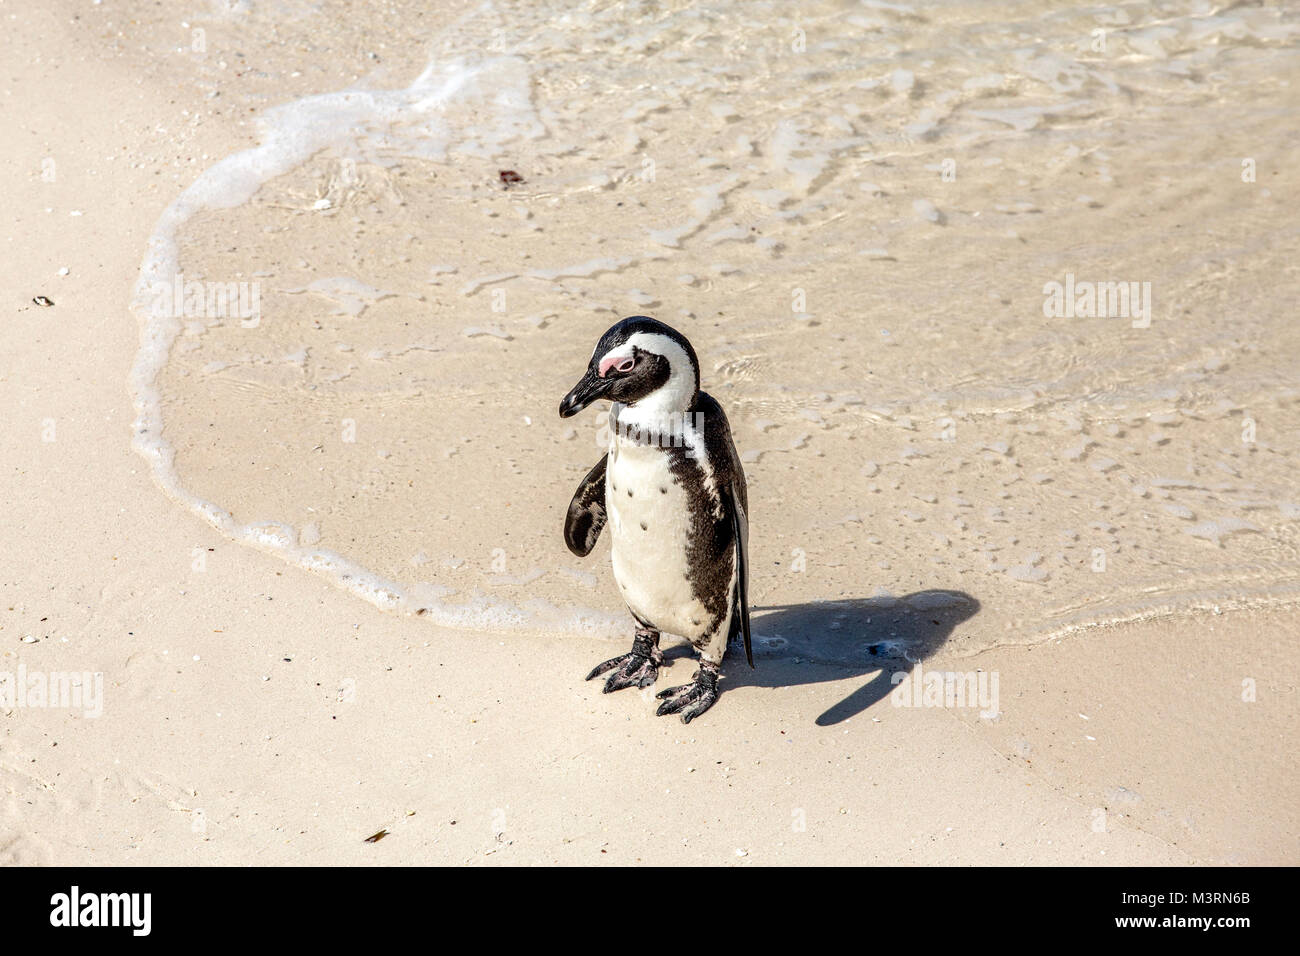 An African blackfoot penguin at the Cape of Good Hope, South Africa. These penguins are good swimmers, with a top speed of 20 kph (13 mph). Stock Photo